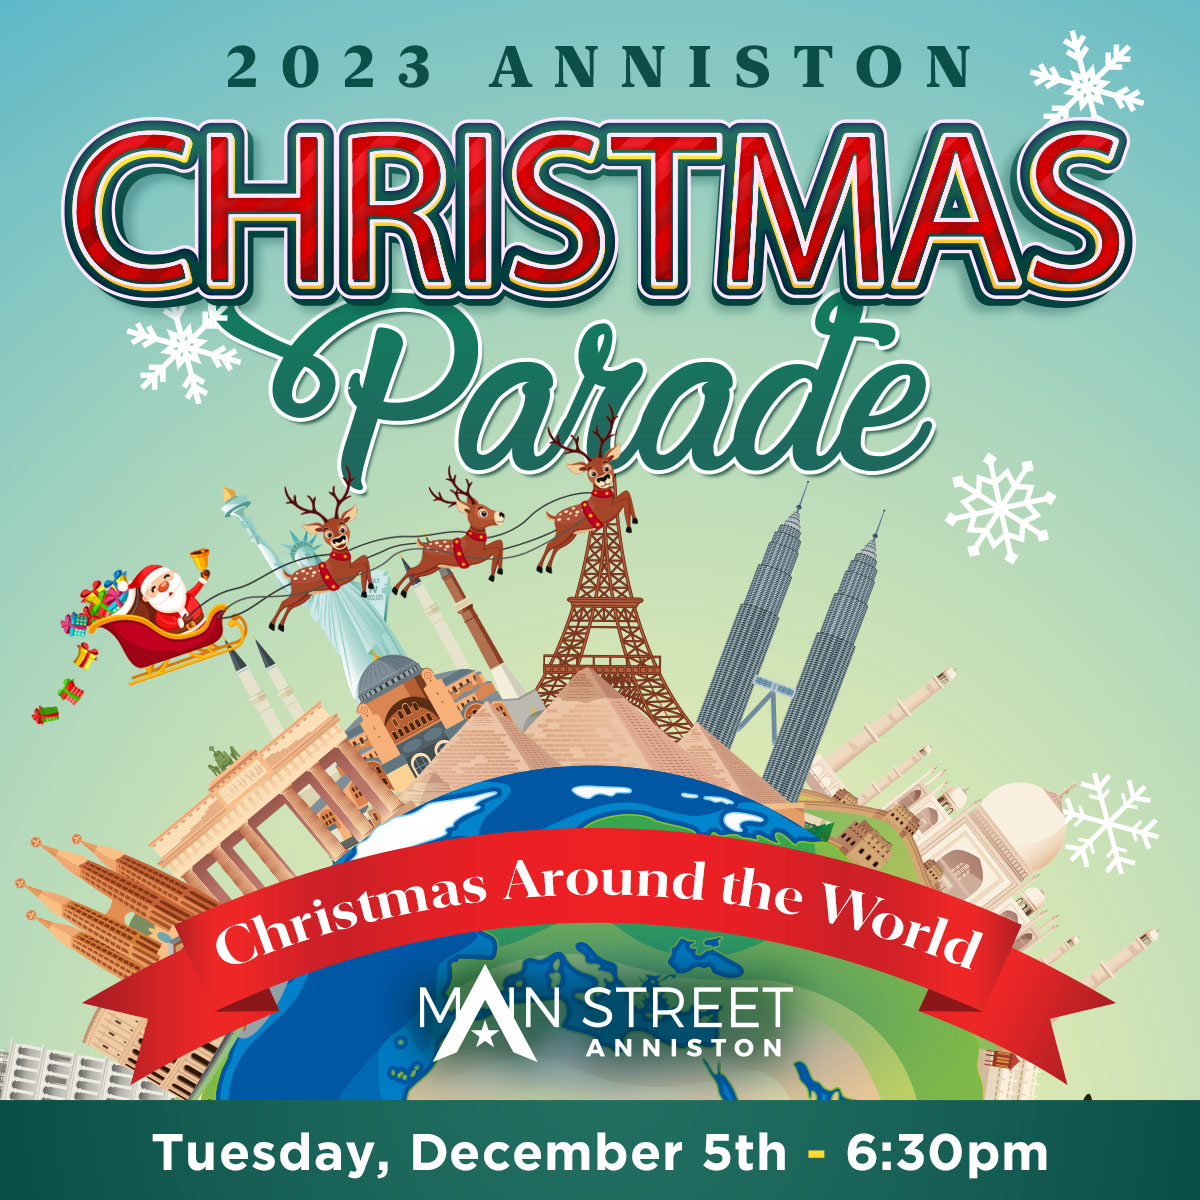 2023 Downtown Christmas Parade! (12/05/23) - The City of Anniston